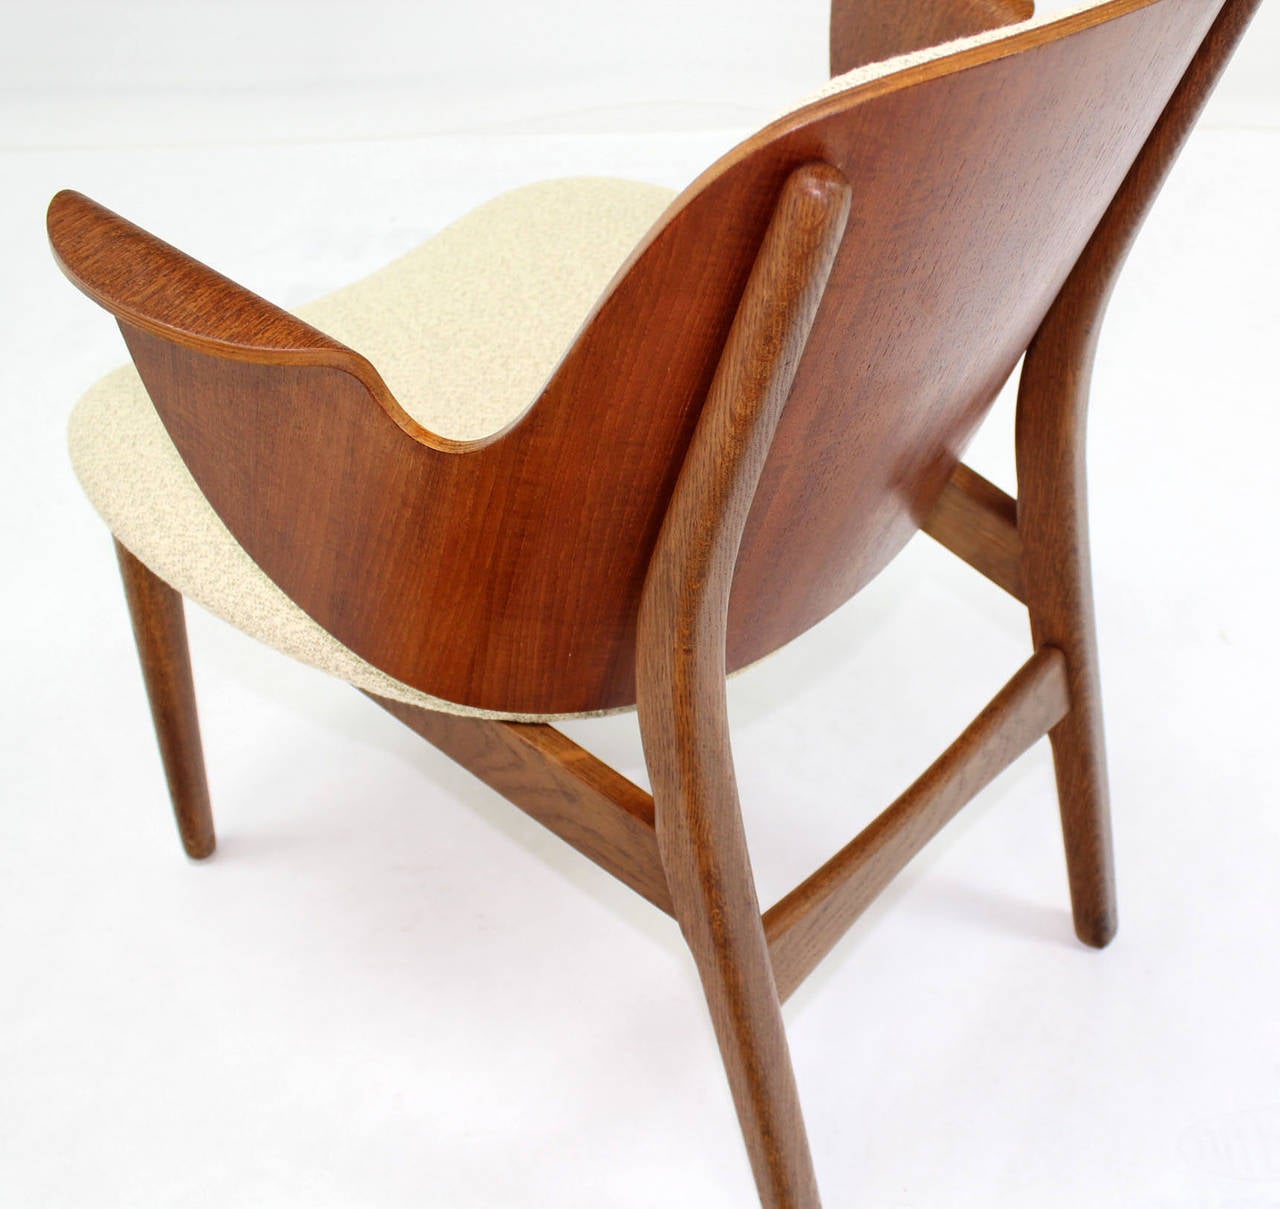 20th Century Mid-Century Modern Molded Plywood Barrel Back Armchair New Upholstery. For Sale